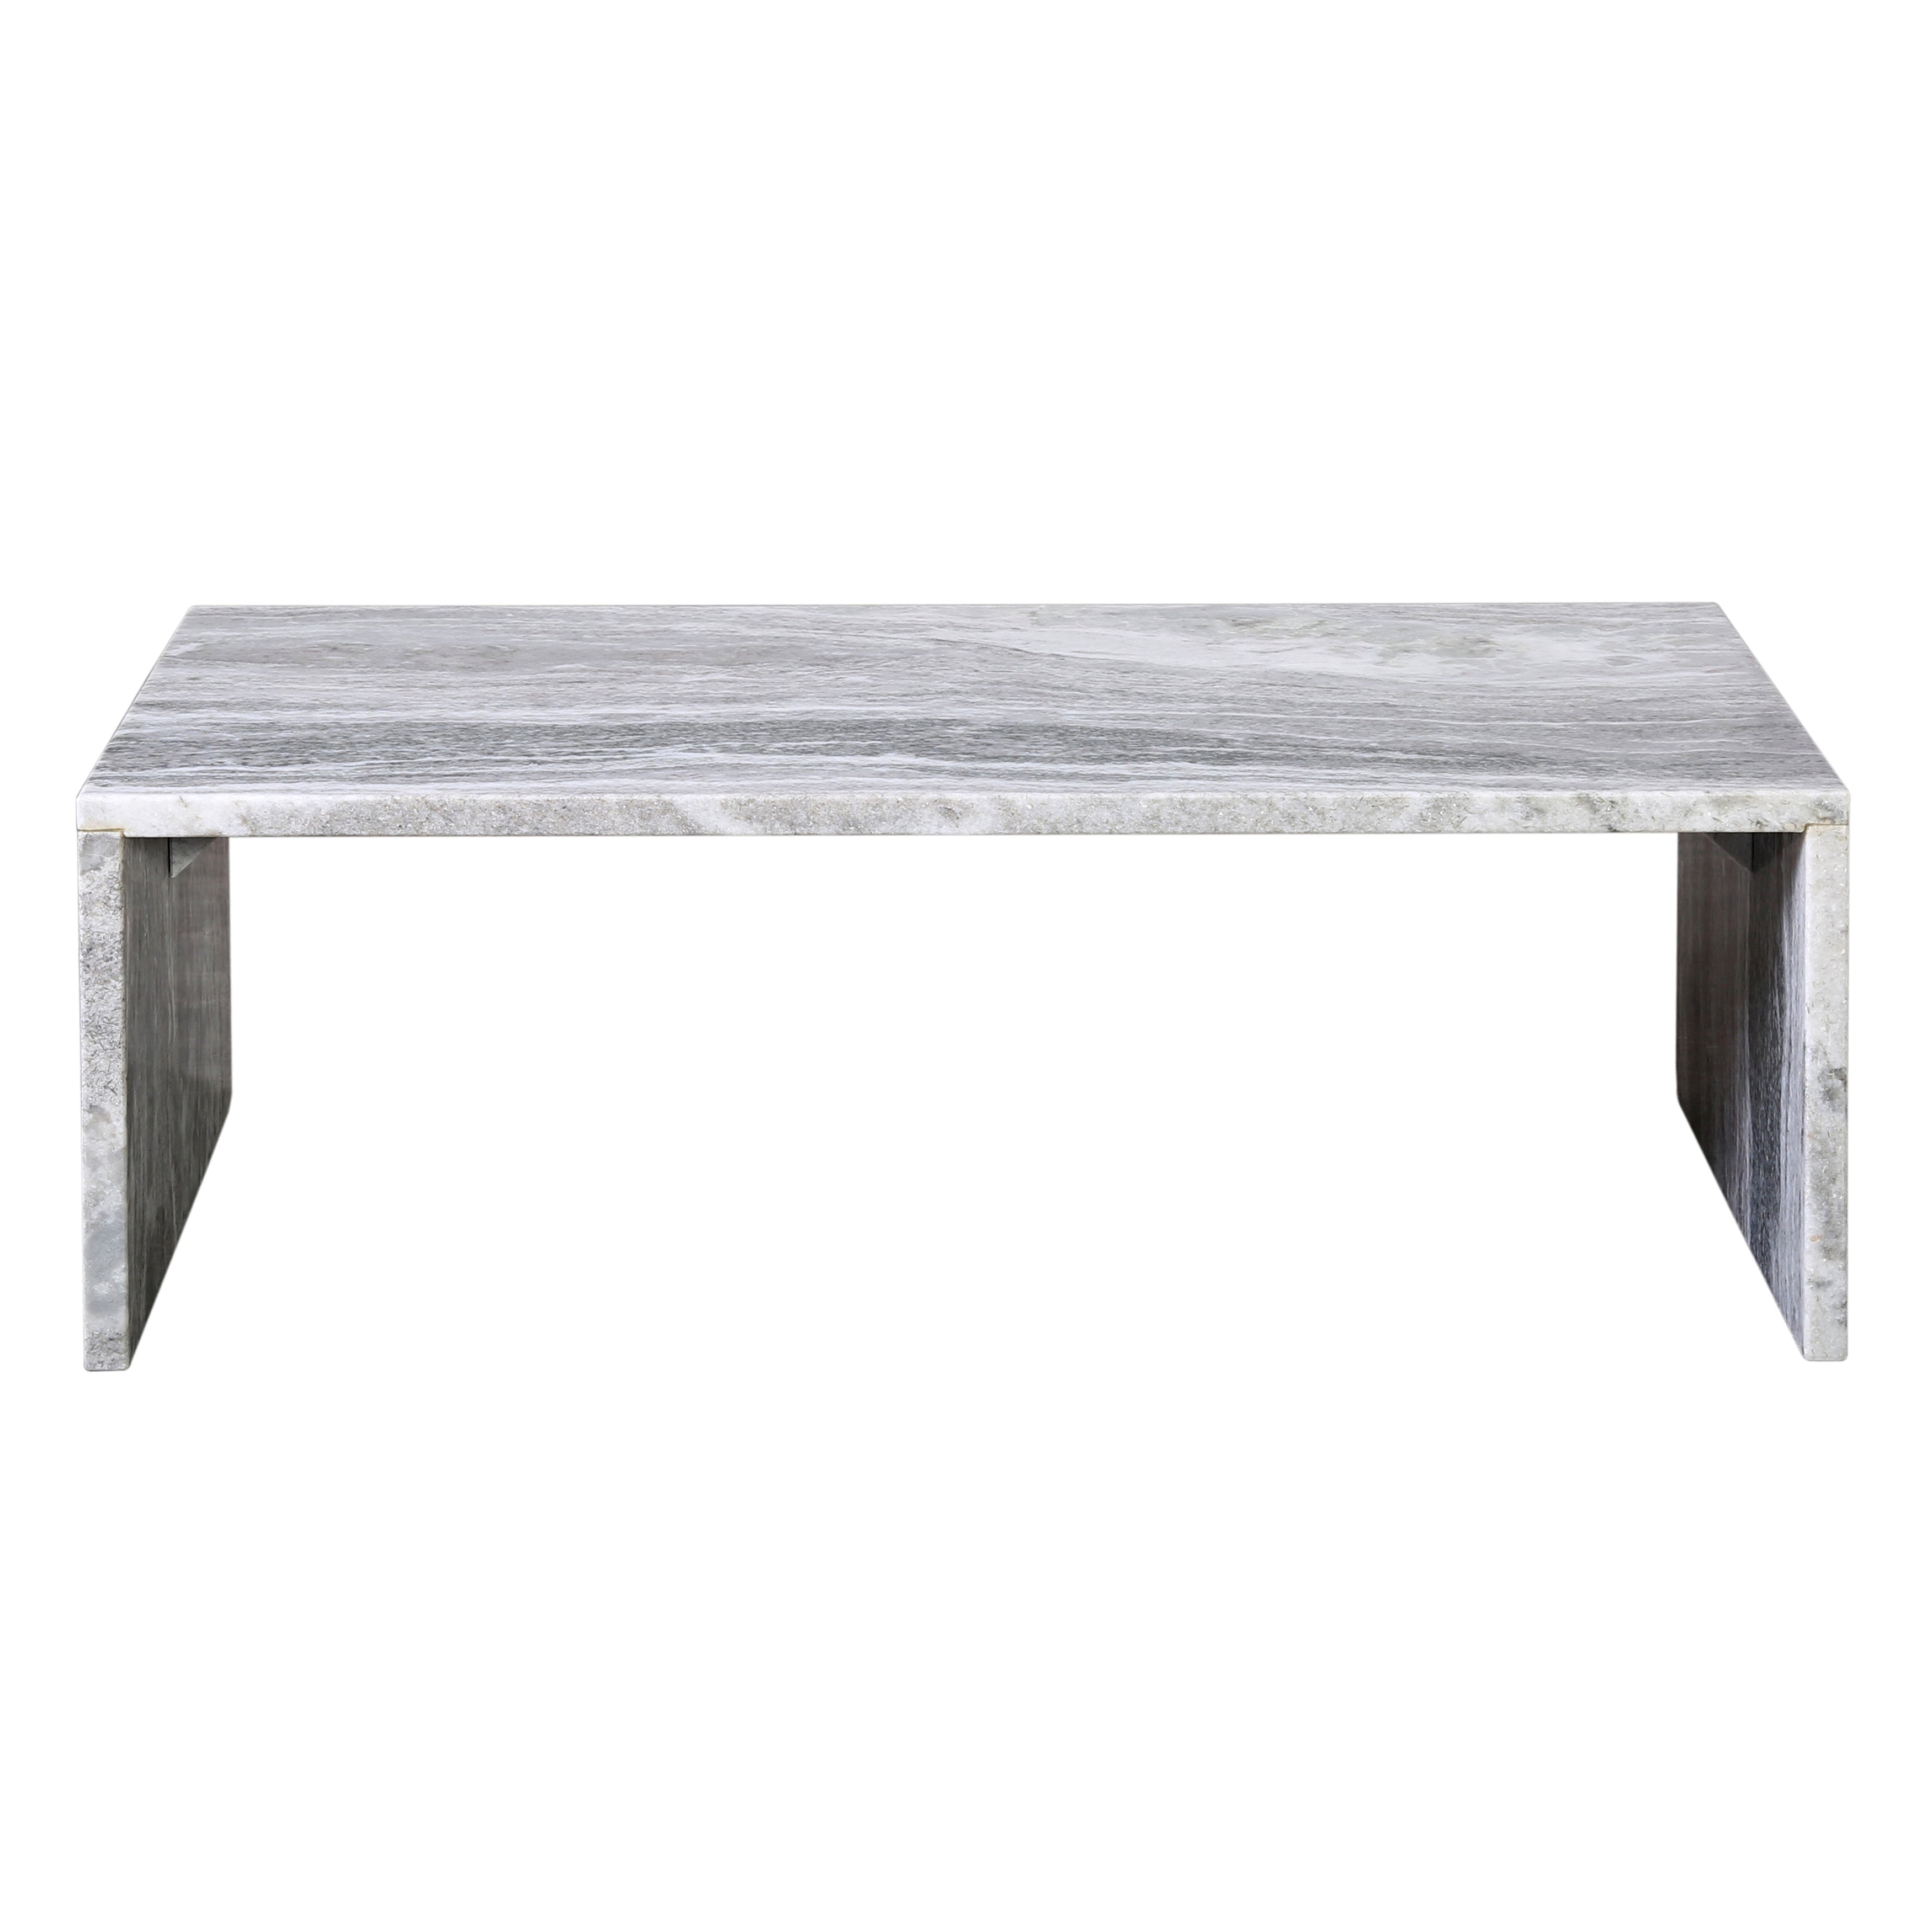 Our Melbourne Coffee Table brings form and function to the modern home with a clean, simple, and low-profile design. Made of beautifully polished natural light grey marble with smooth edges, it's defined by its rectangular figure measuring 15.75” tall and 47.25” wide. Amethyst Home provides interior design, new home construction design consulting, vintage area rugs, and lighting in the Omaha metro area.